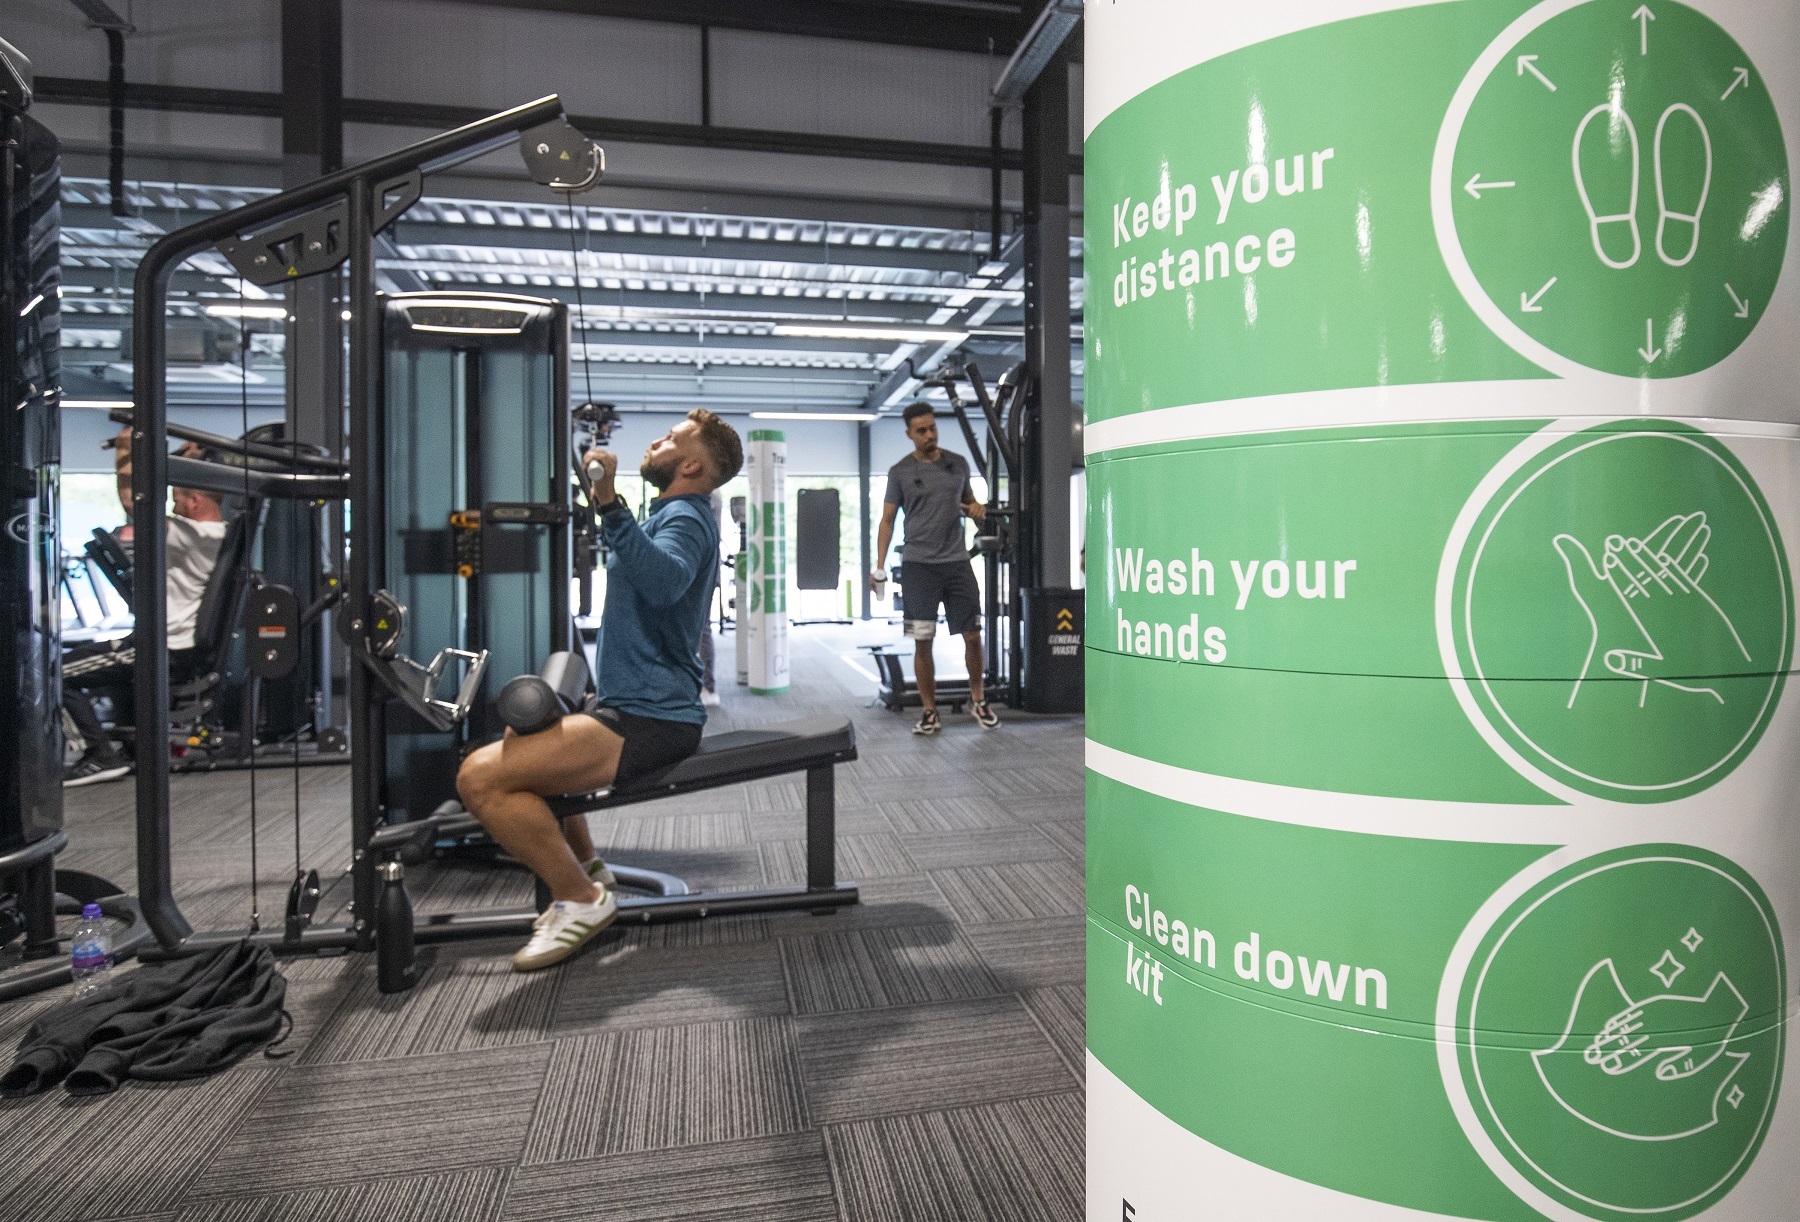 Gym members work out on socially-distanced fitness machines at the new PureGym Local in Kirkcaldy, Fife..